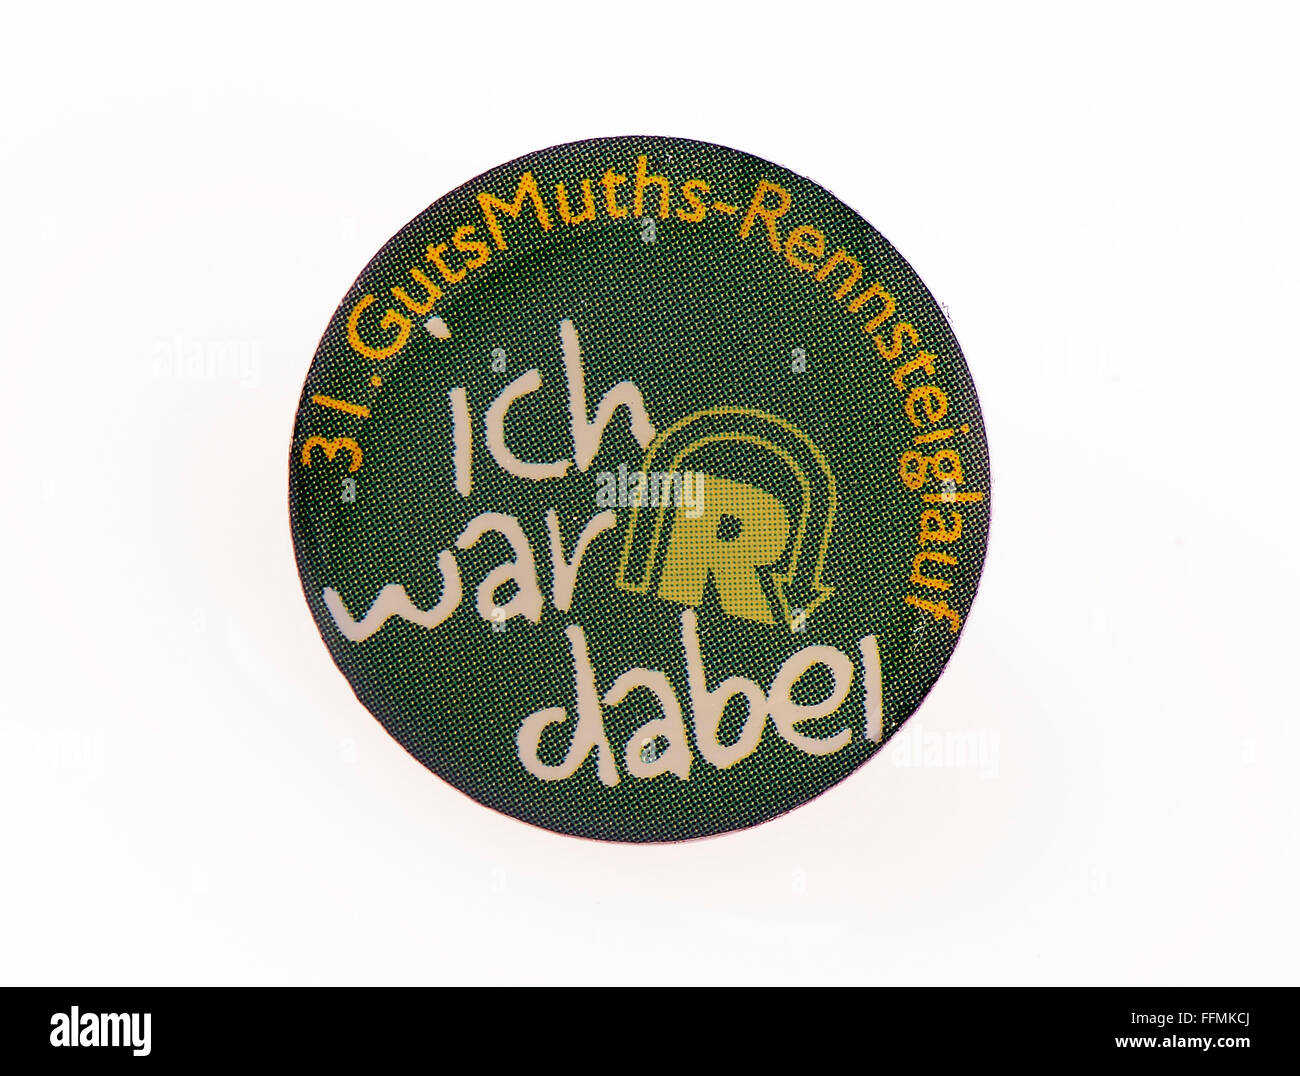 sports, running, badge on the occasion of the 31st Rennsteiglauf, 'Ich war dabei' (I Participated), Thuringia, 17.5.2003, Additional-Rights-Clearences-Not Available Stock Photo